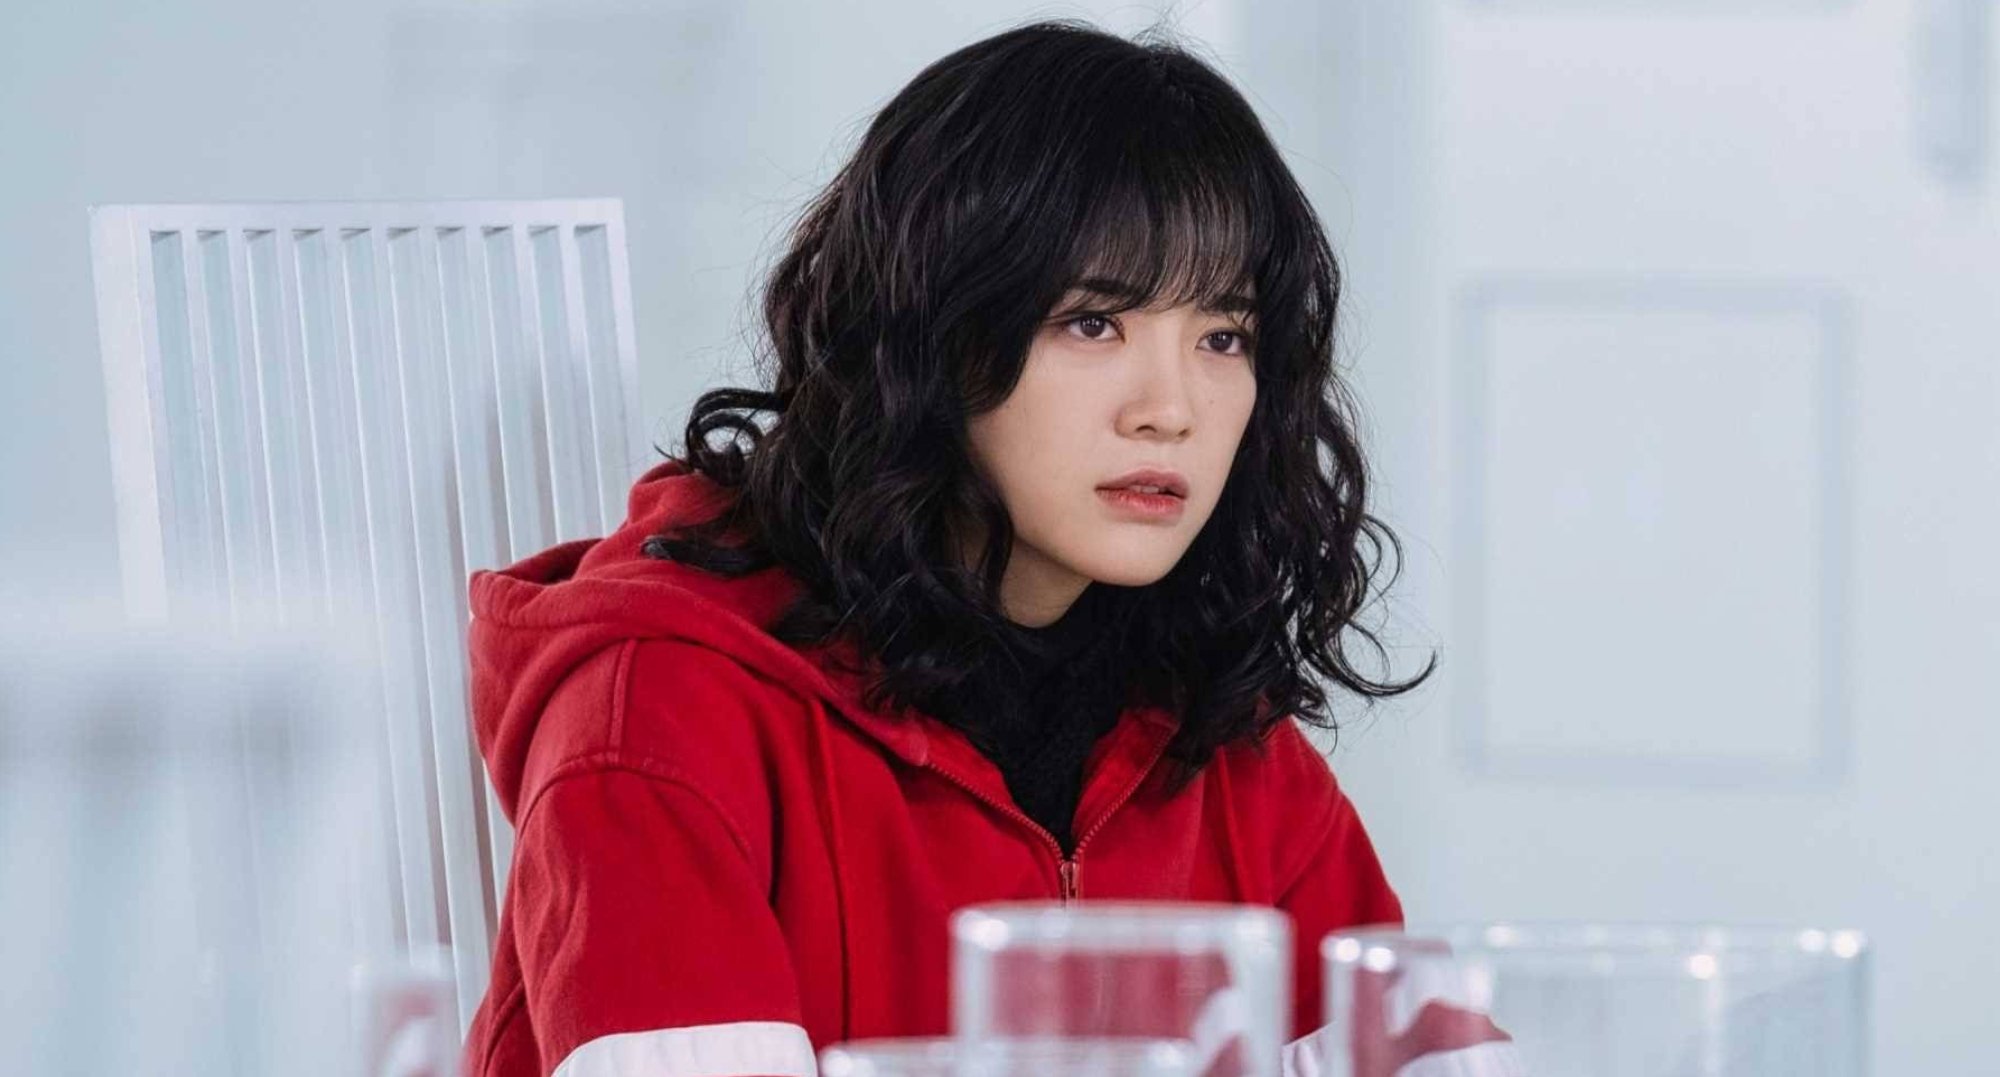 Kim SeJeong as Do Ha-na in 'The Uncanny Counter' wearing a red tracksuit.